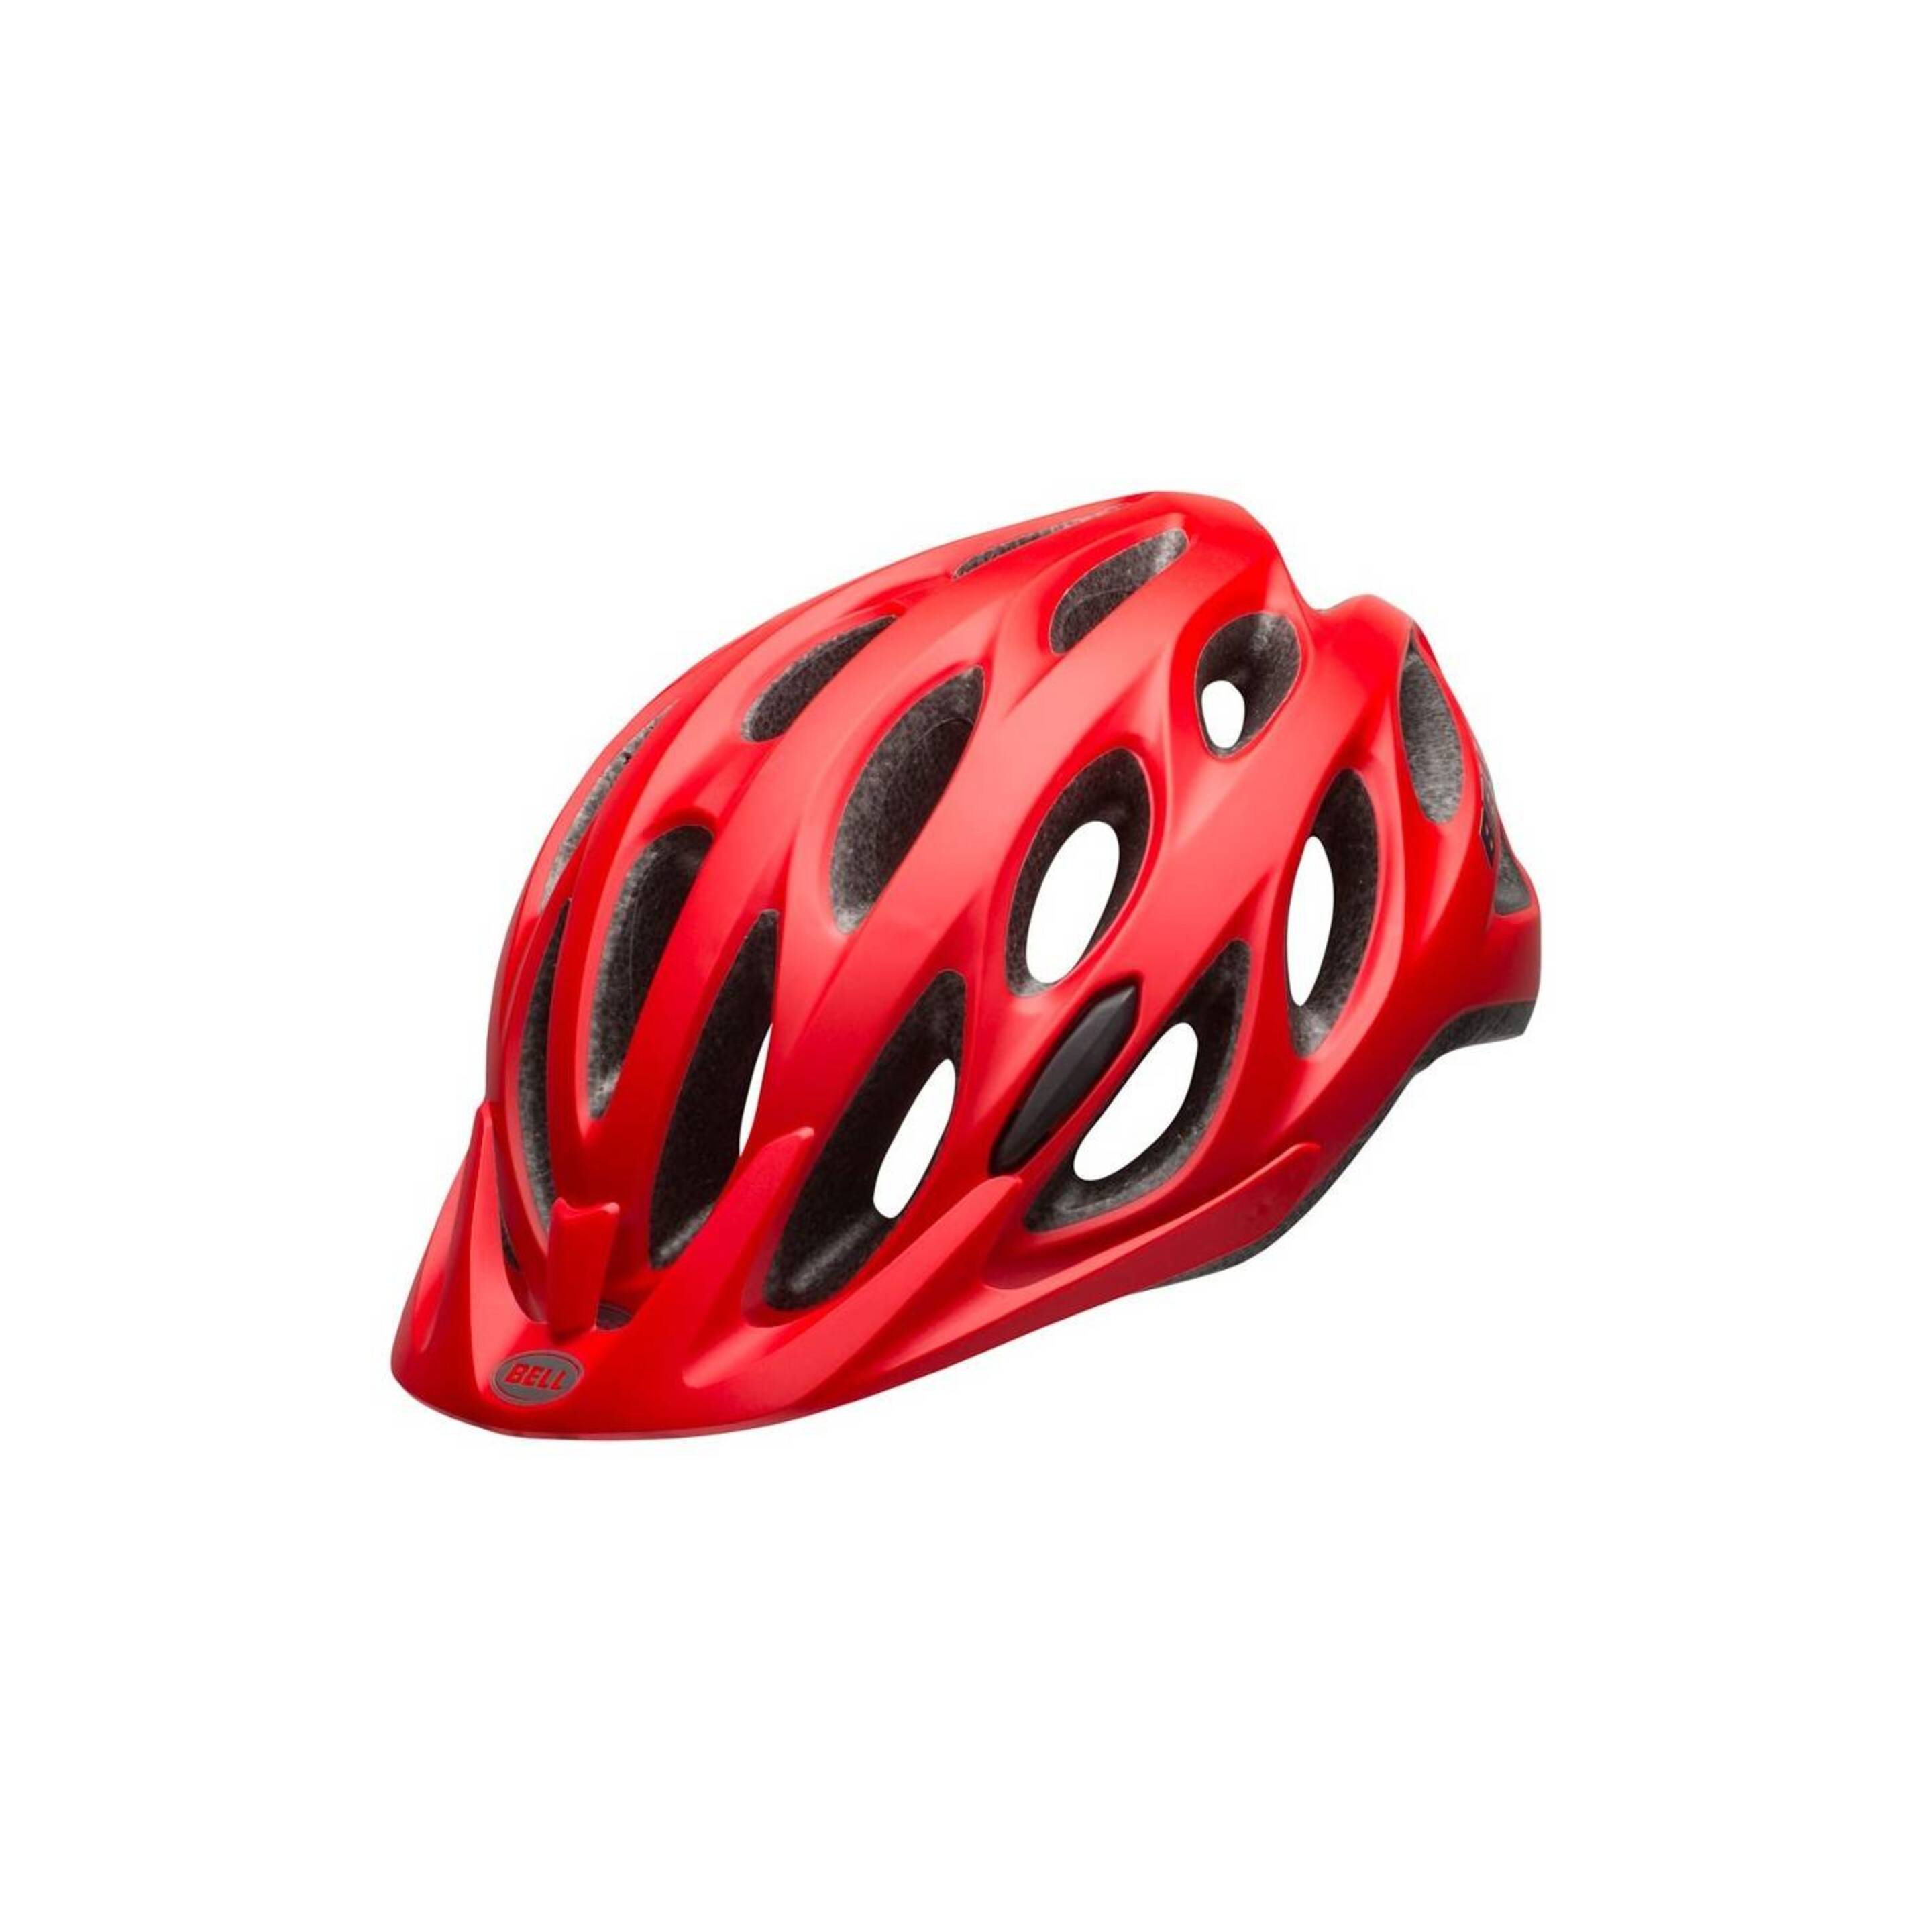 Capacete Ciclismo Bell Tracker - rojo - 